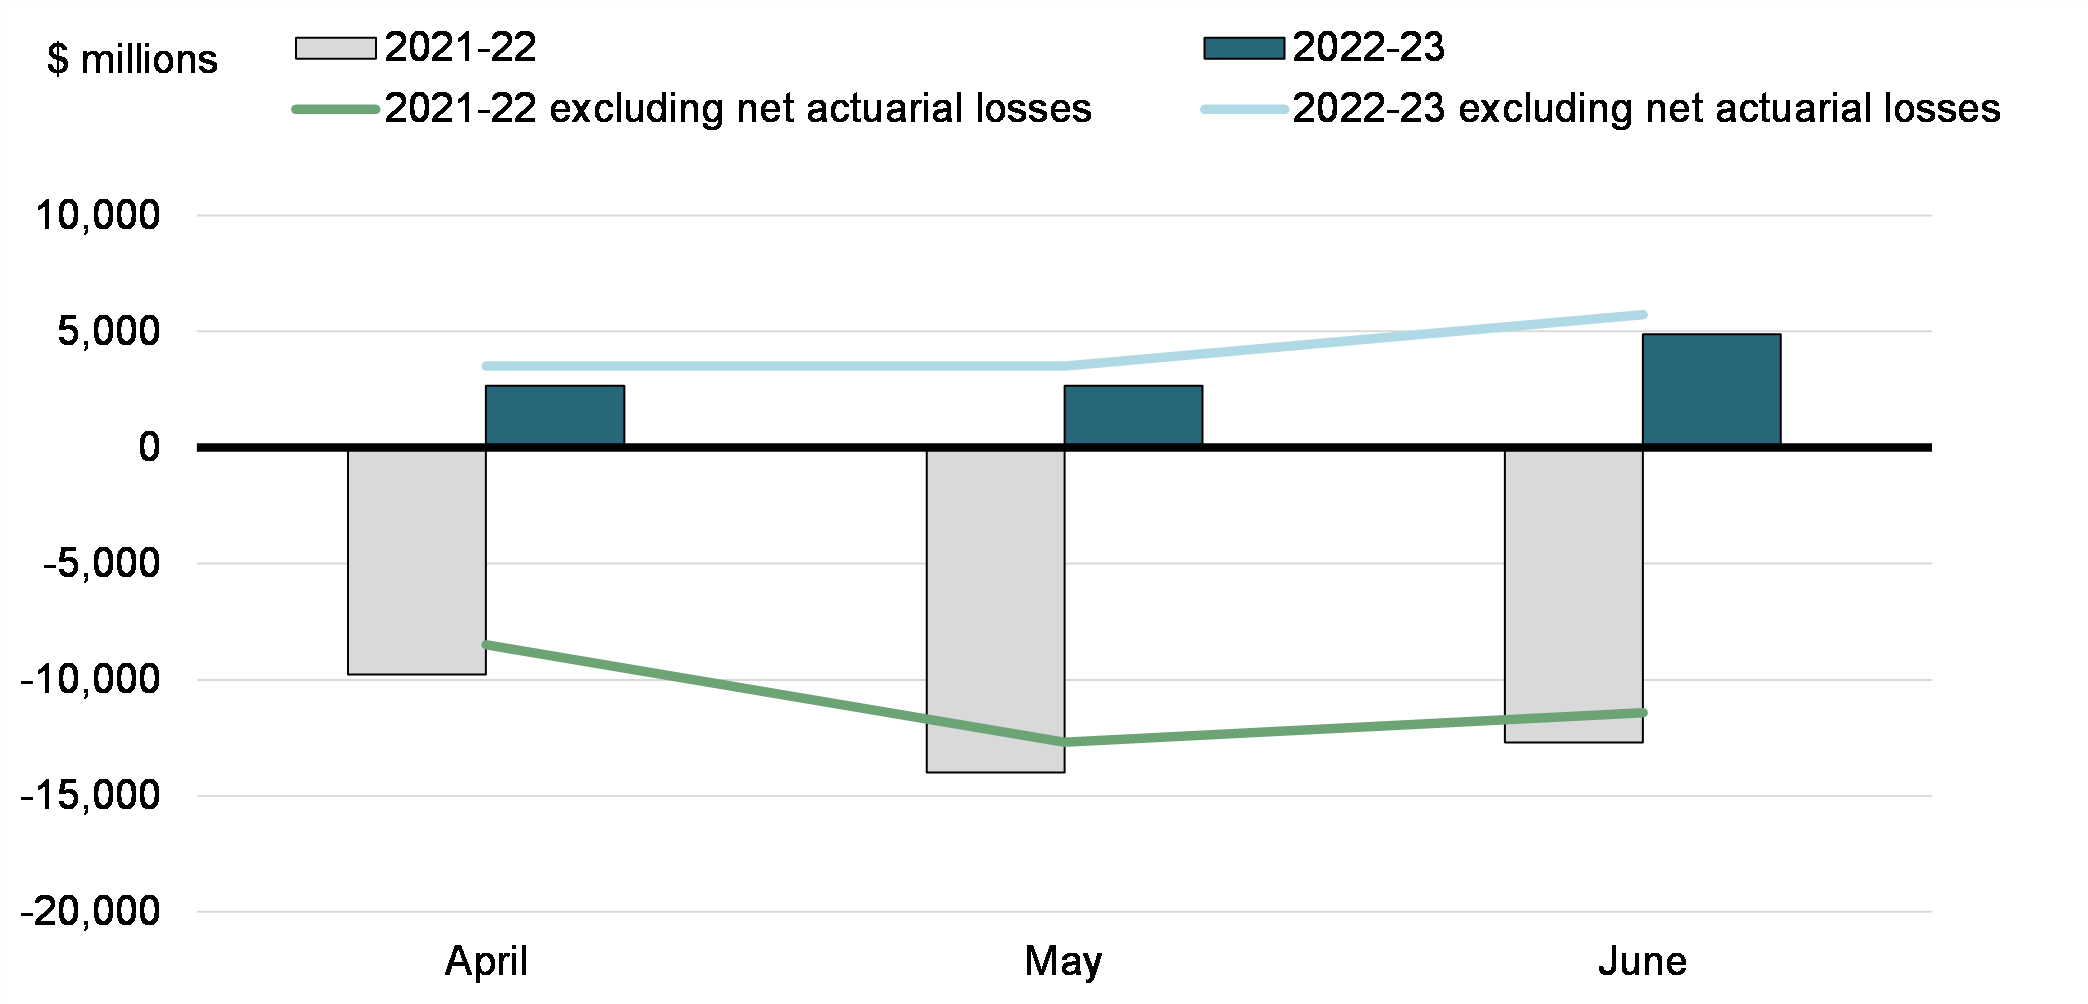 Chart 1: Monthly Budgetary Balance and Budgetary Balance Excluding Net Actuarial Losses